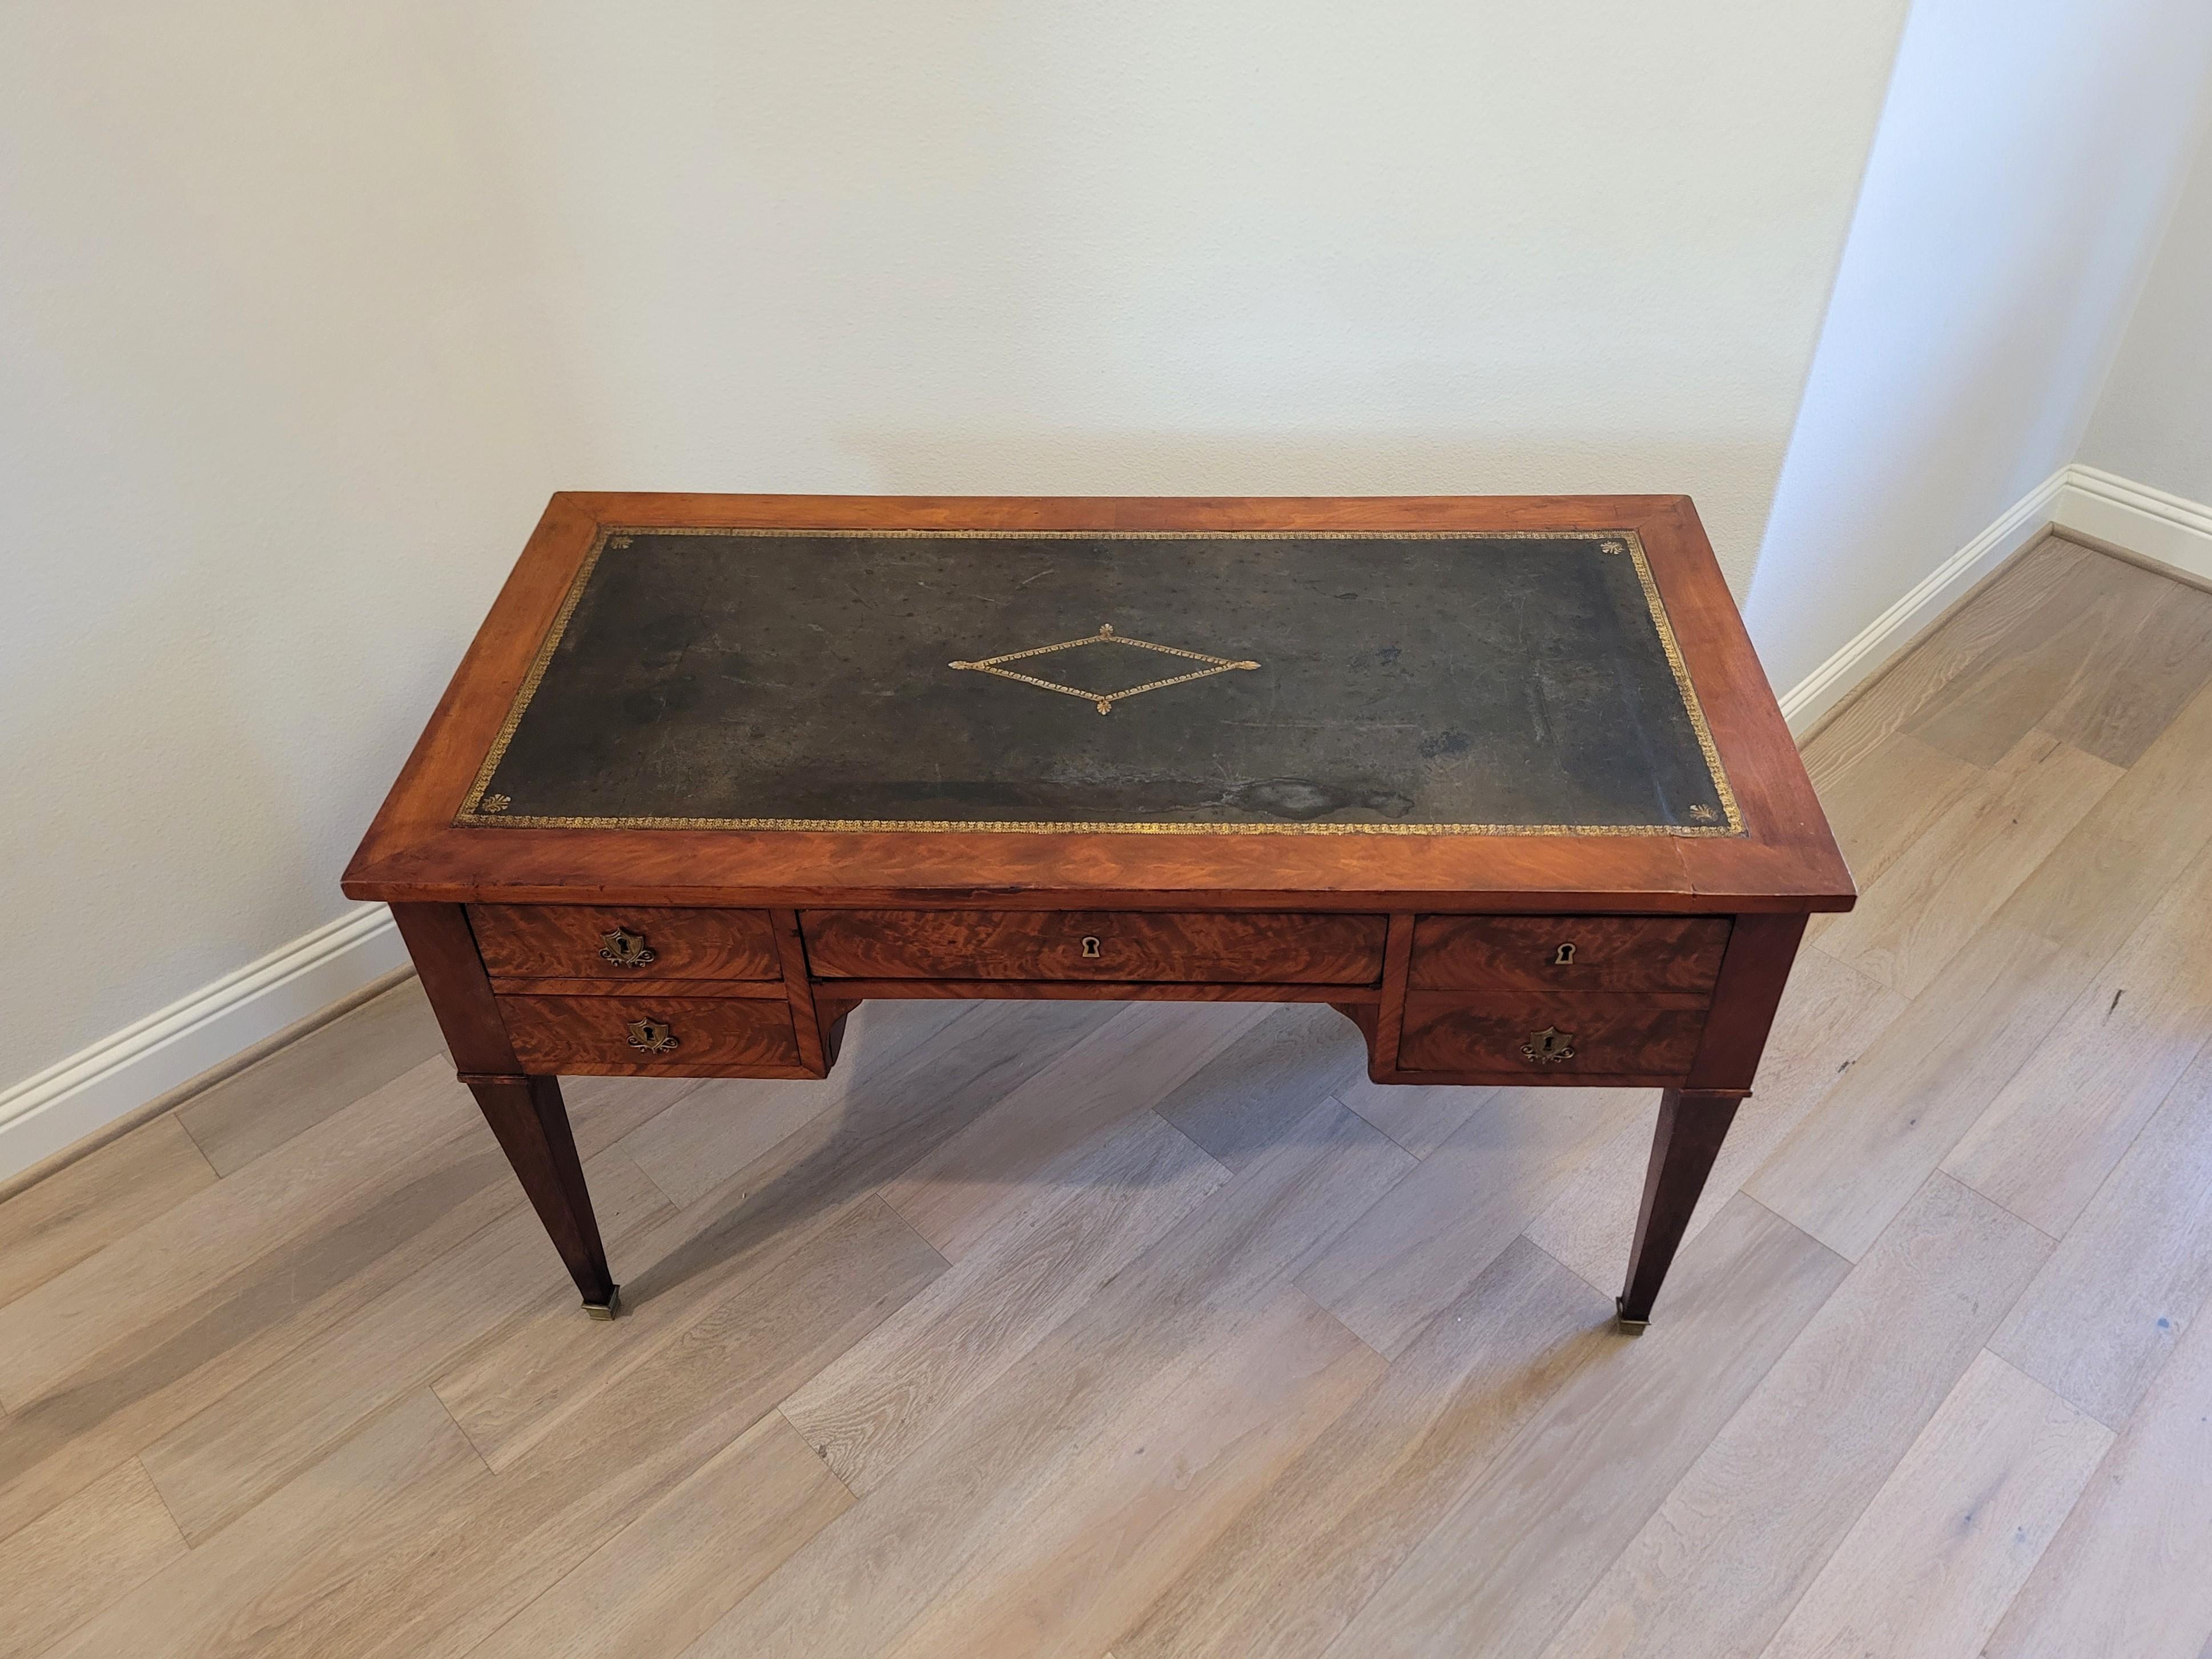 A handsome nearly 200 year old French Restoration (1815-1830) / Louis Philippe (1830-1848) Period mahogany bureau plat with beautifully aged patina.

Born in France during the first half of the 19th century, hand-crafted of warm rich solid